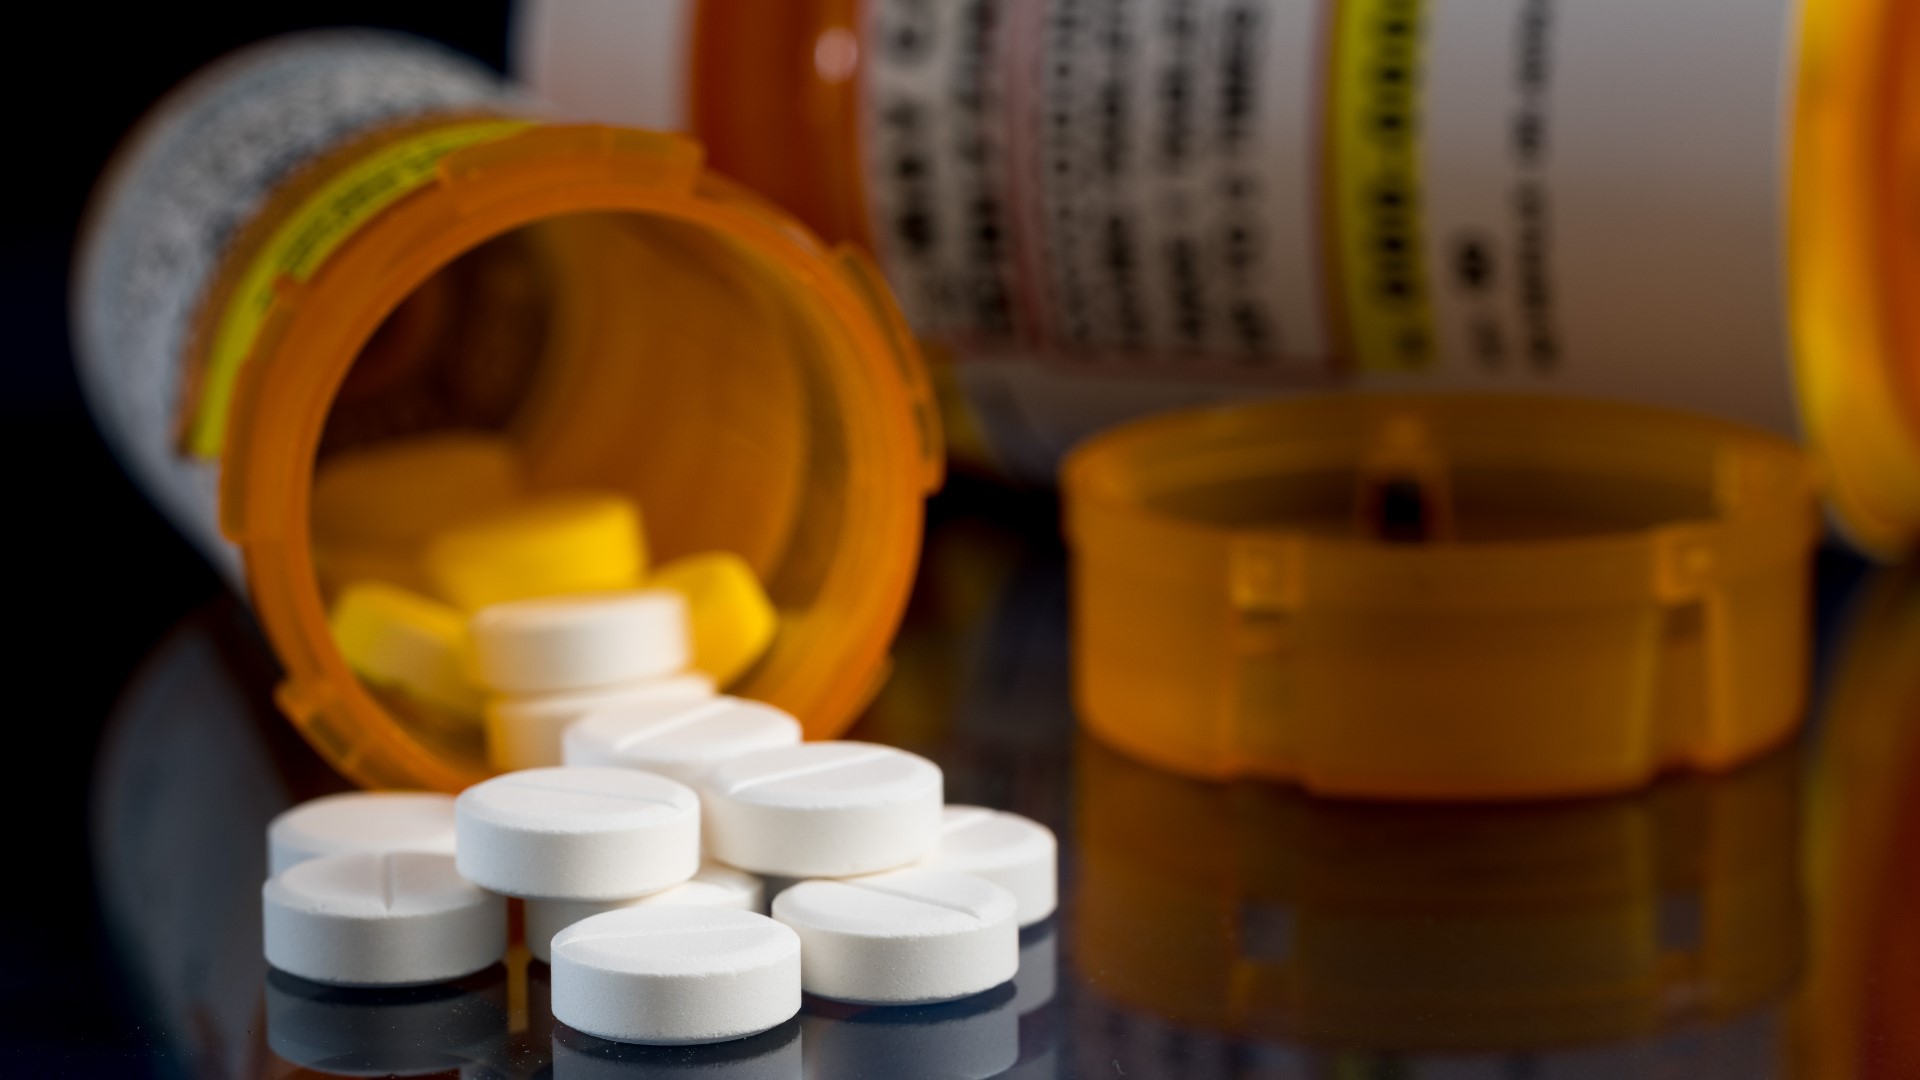 The person pleaded guilty after writing nearly 4,000 illegal prescriptions without the supervision of a doctor.